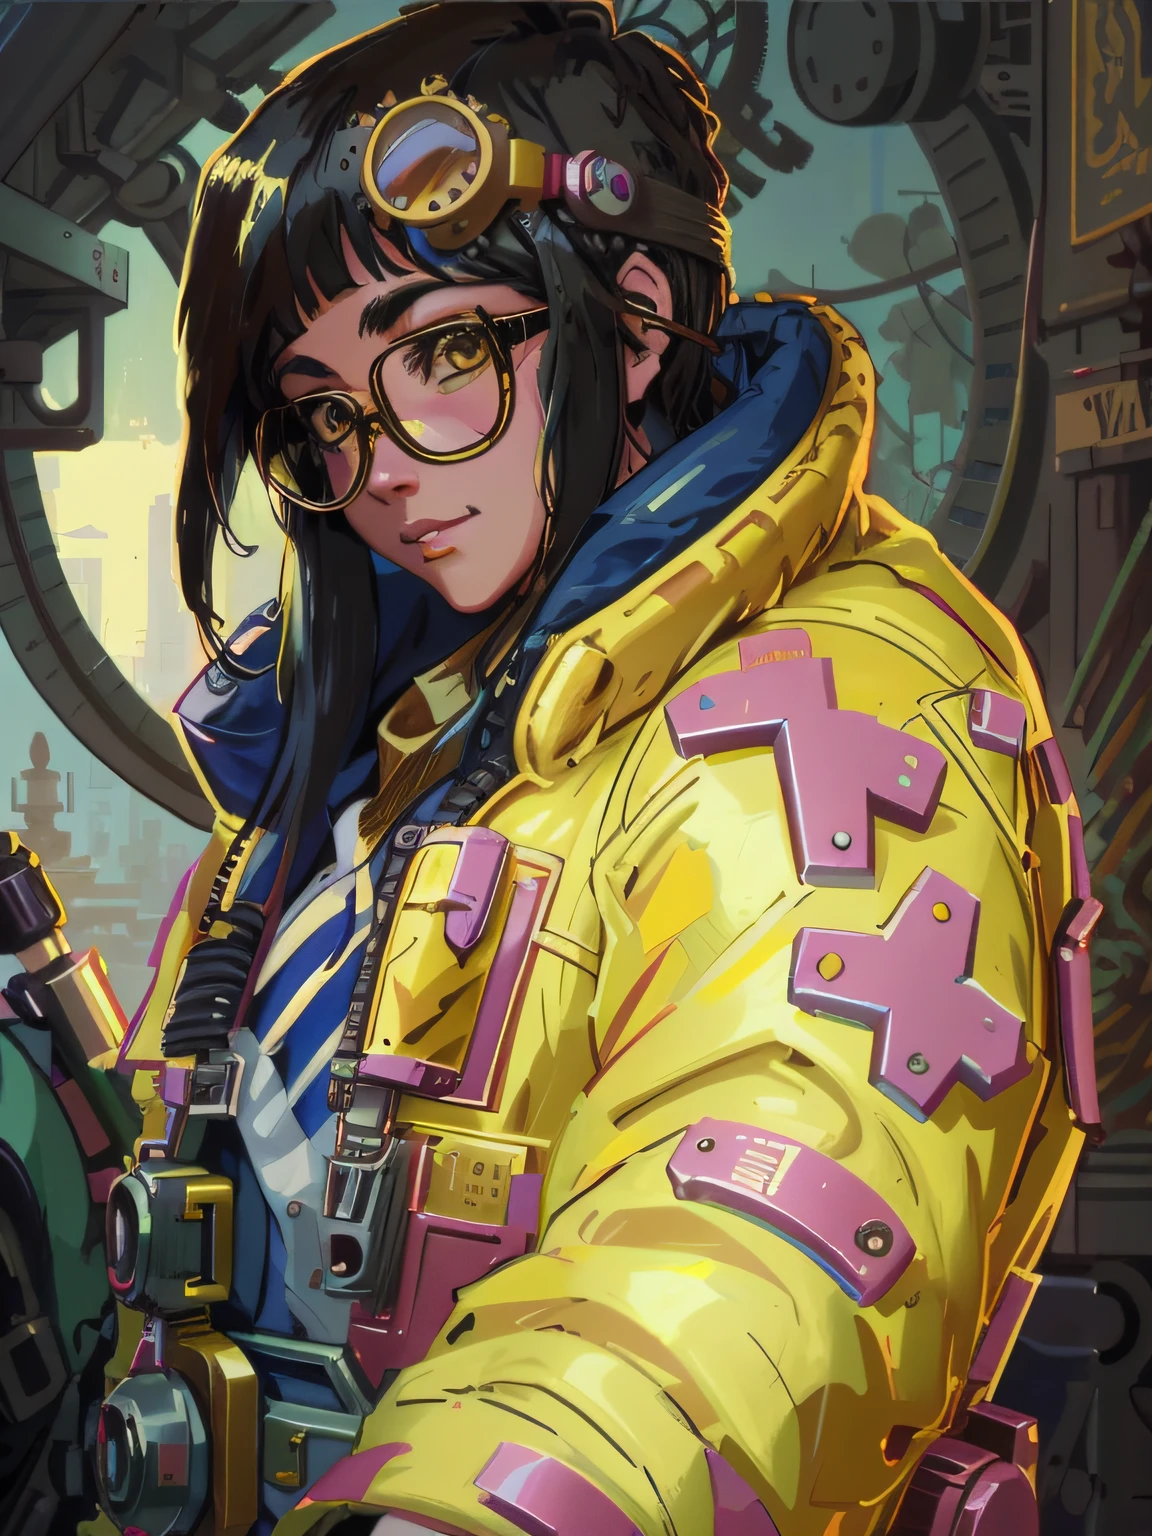 A portrait of kljy, yellow jacket,  with a steampunk setting, highly detailed, with intricate machinery and accessories, in the art style of artists like Jules Verne, H.G. Wells, Hayao Miyazaki, and Simon Stlenhag.